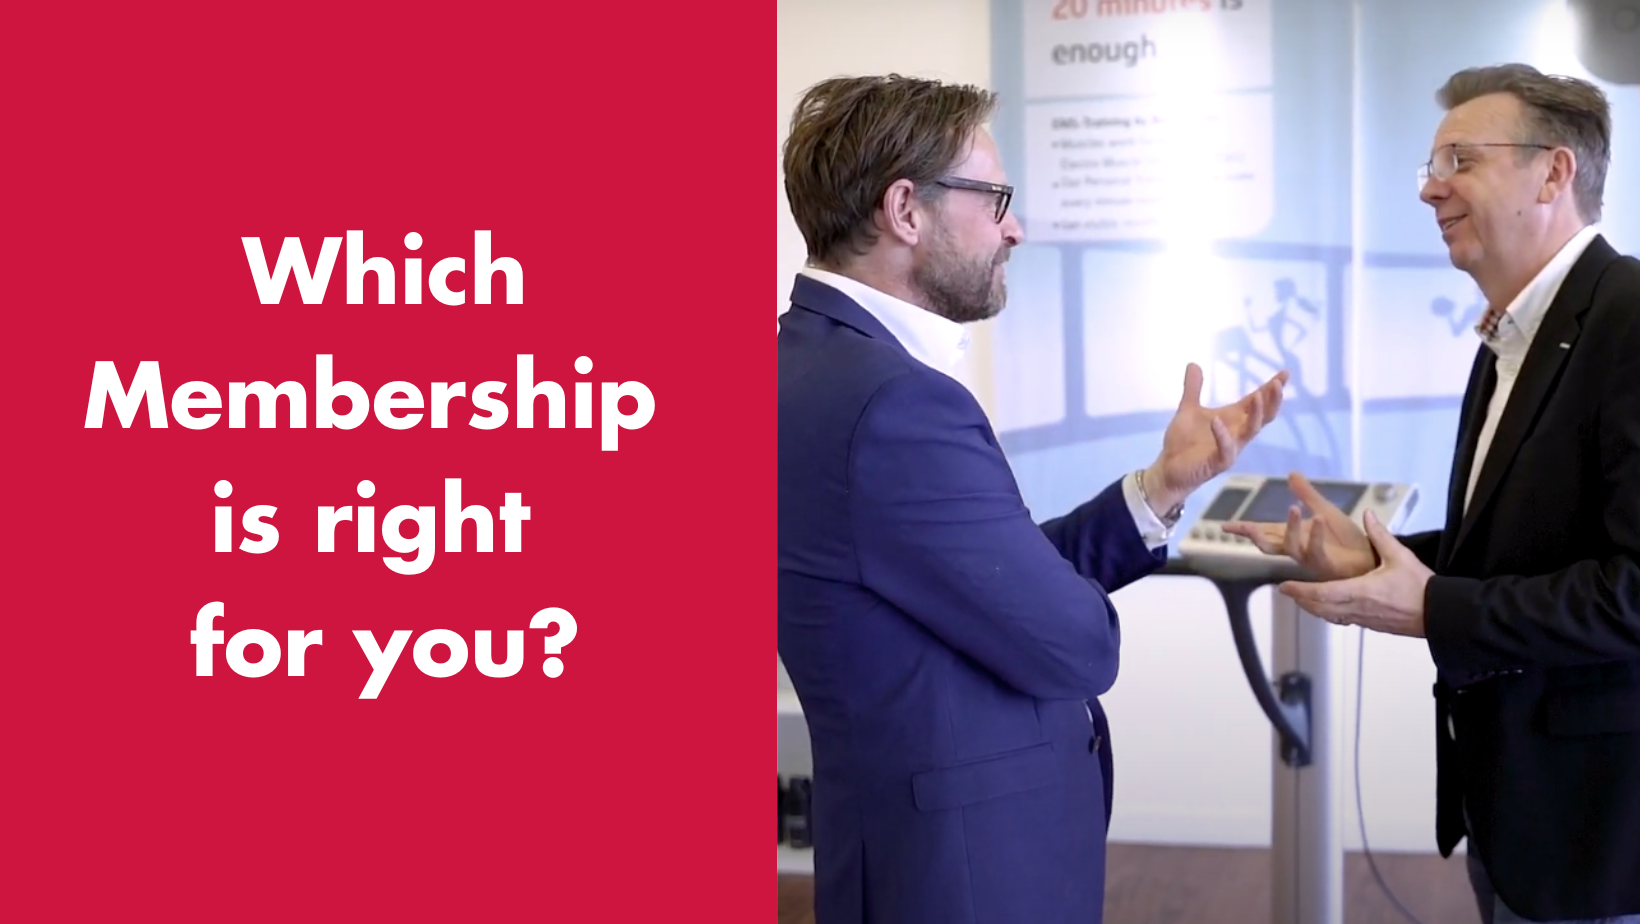 Which membership is right for you?